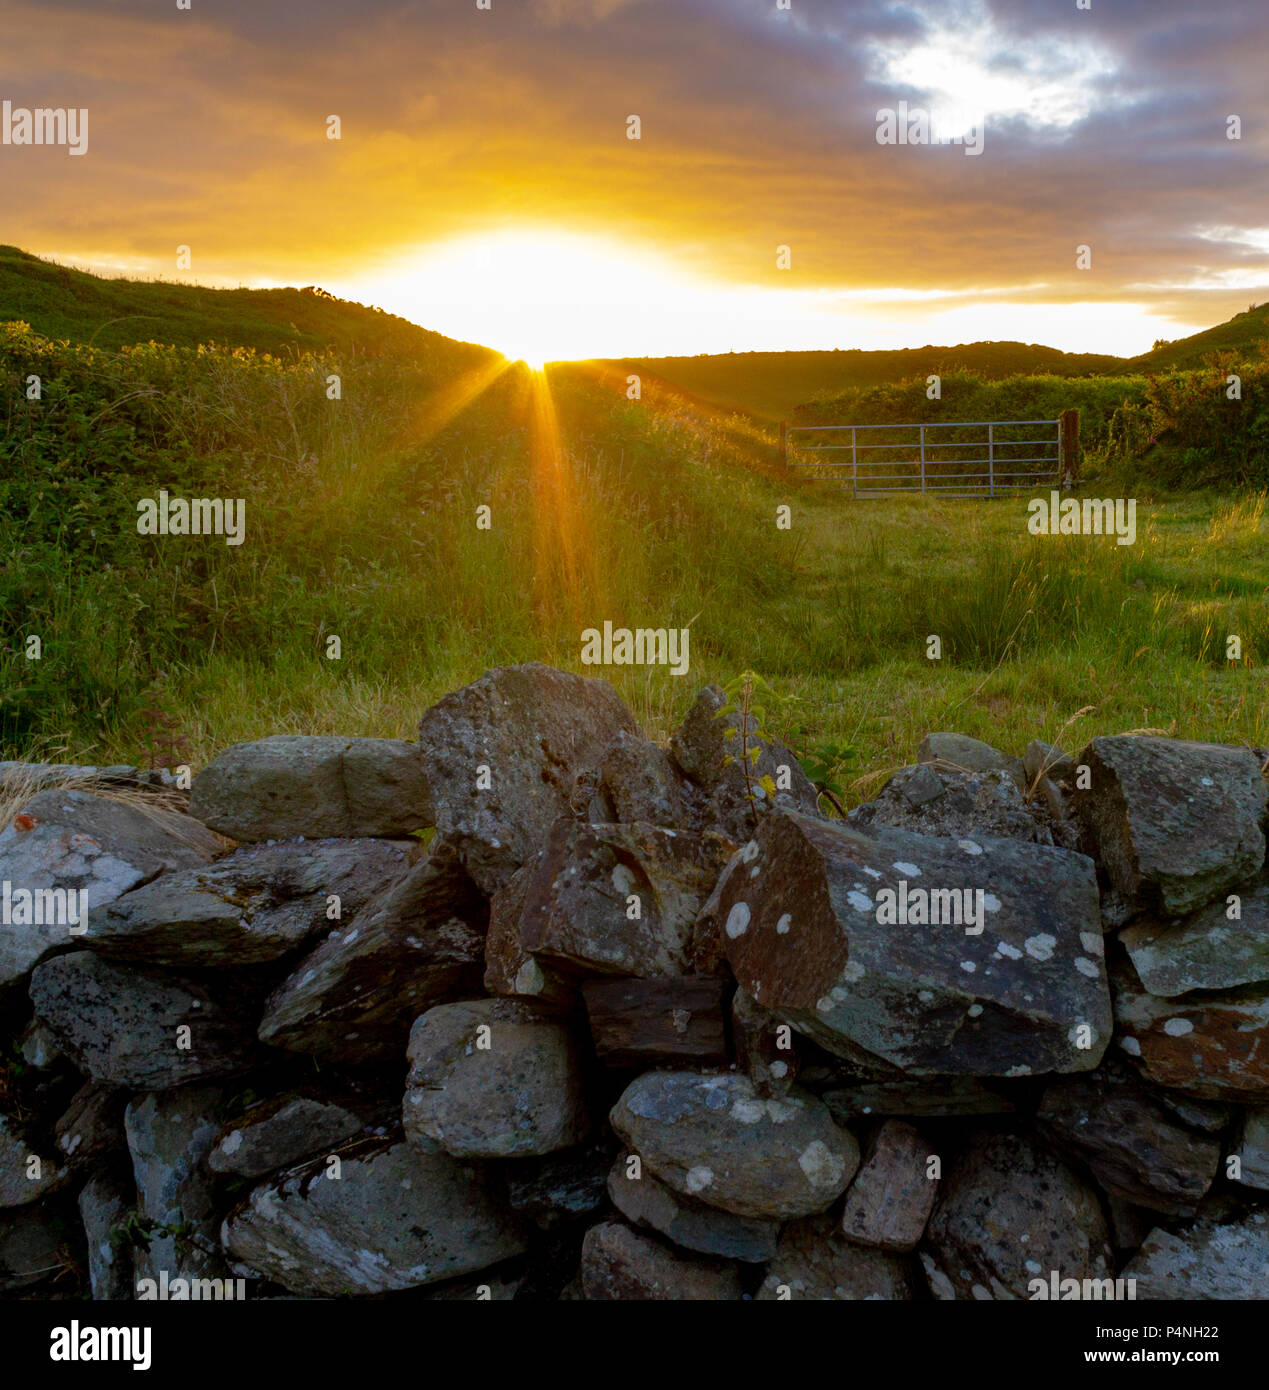 sunrise or dawn over the countryside in Ireland with the sunrays highlighting a dry stone wall. Stock Photo